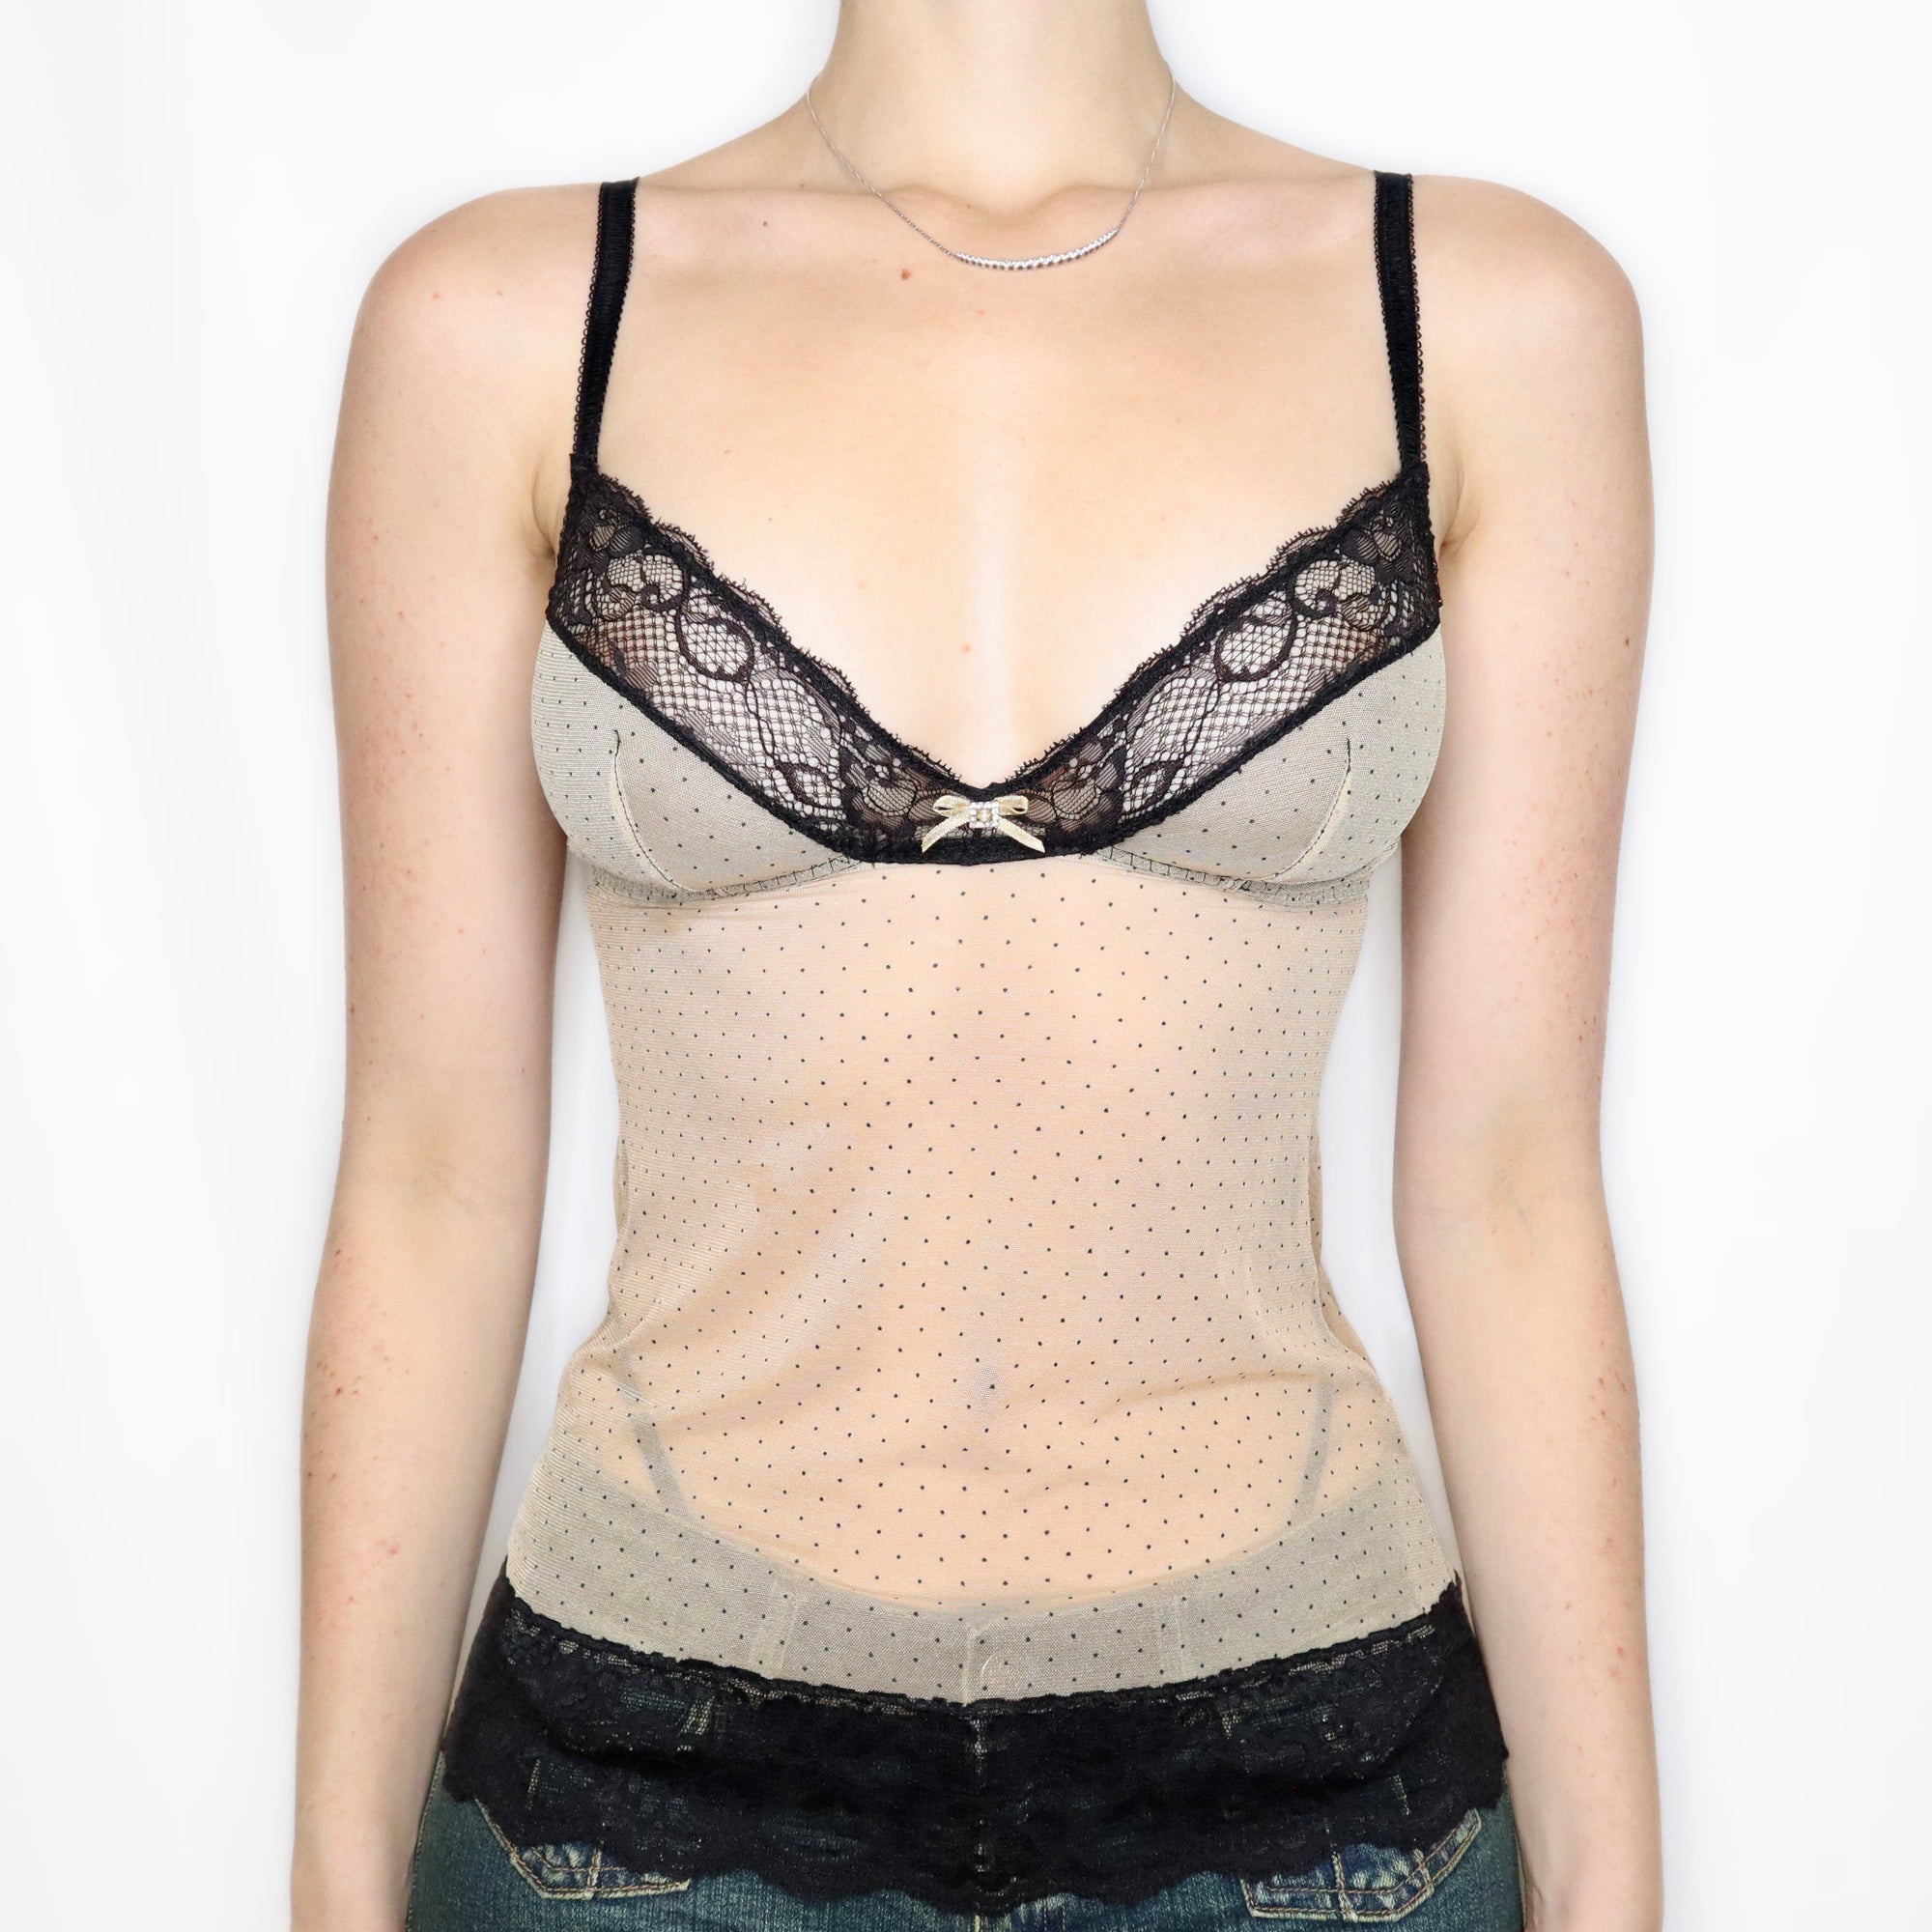 Vintage Early 2000s Ecru and Black Lace Bustier Cami